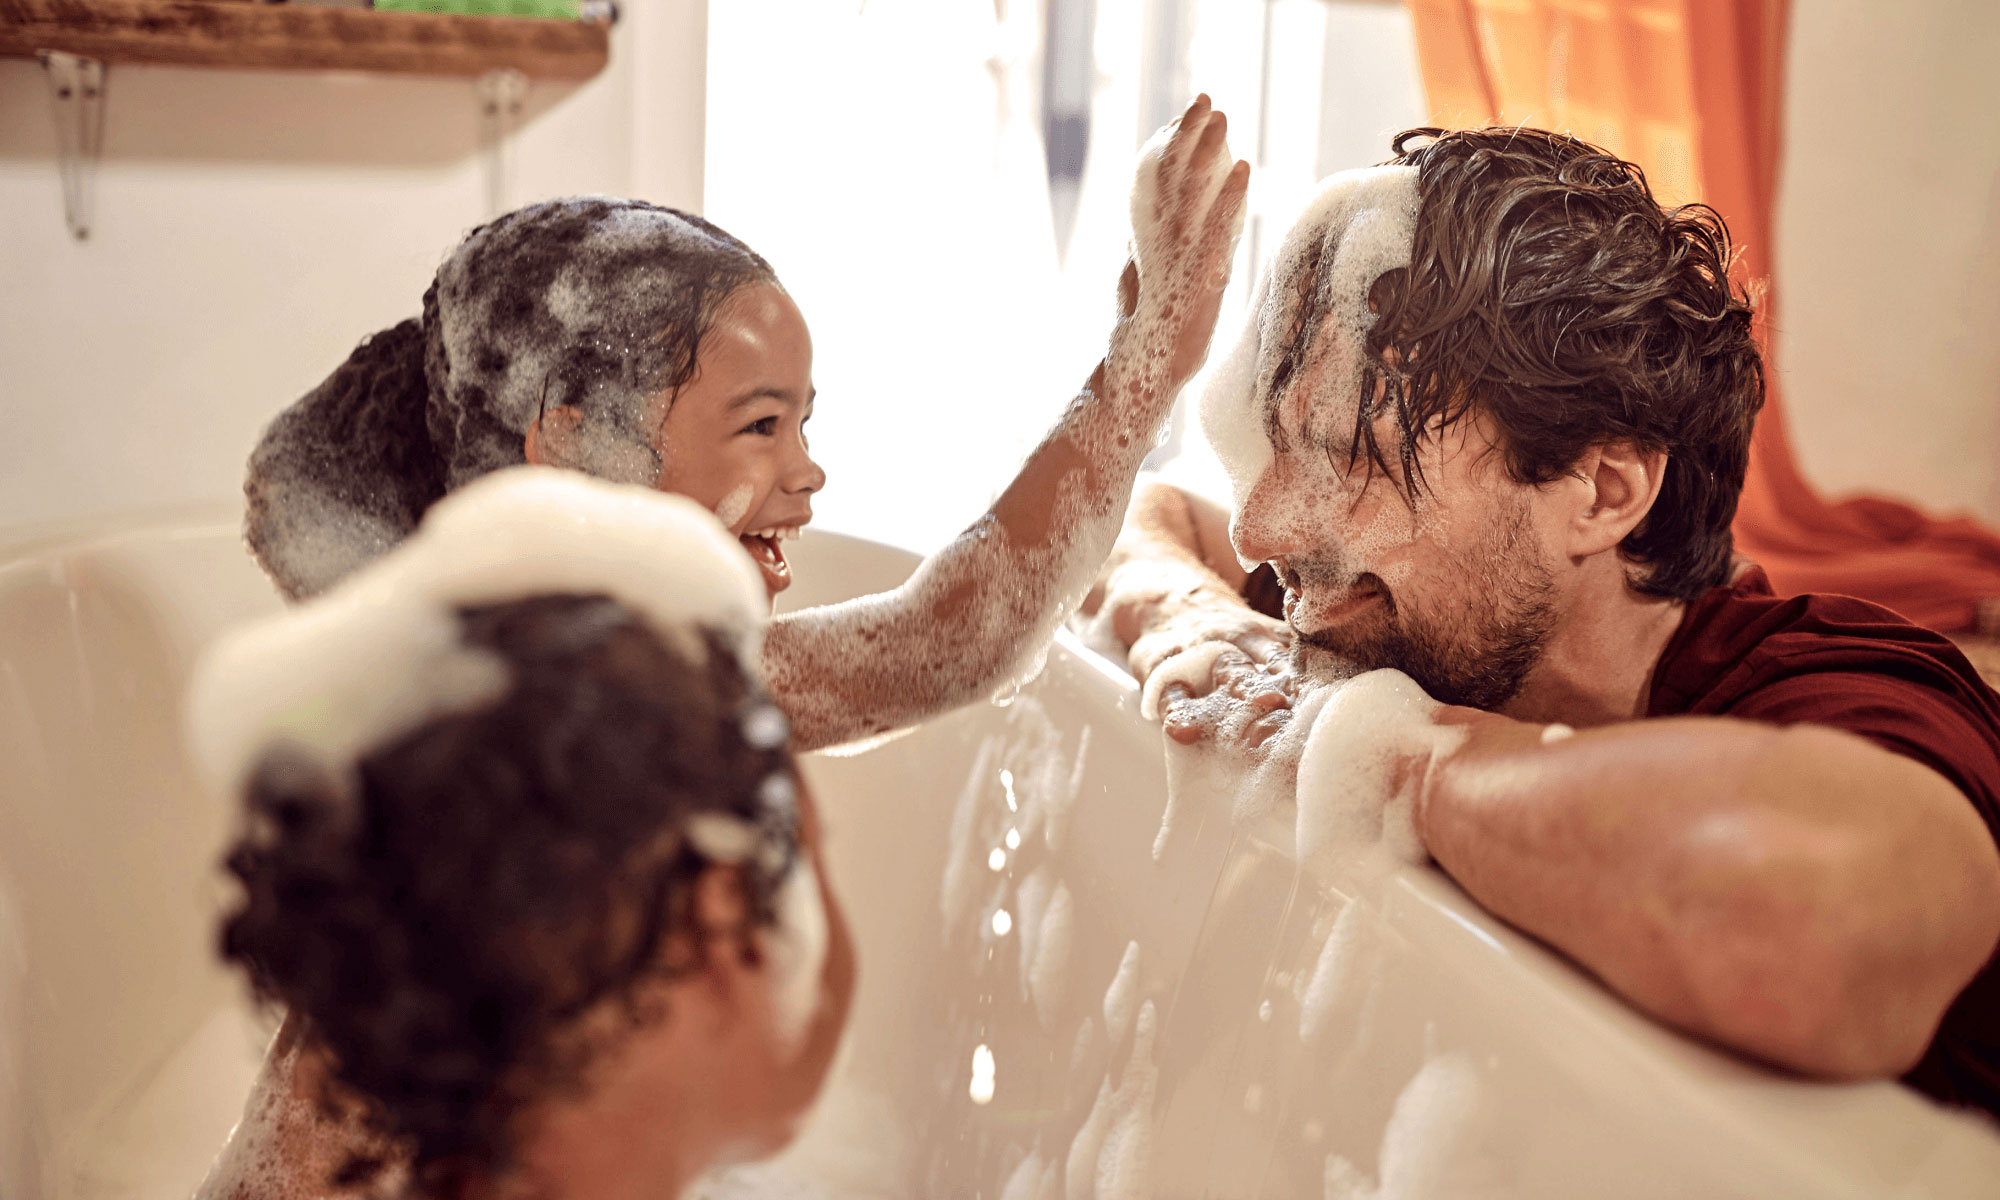 Father covered in suds while playing with his daughters in the tub, they're laughing.